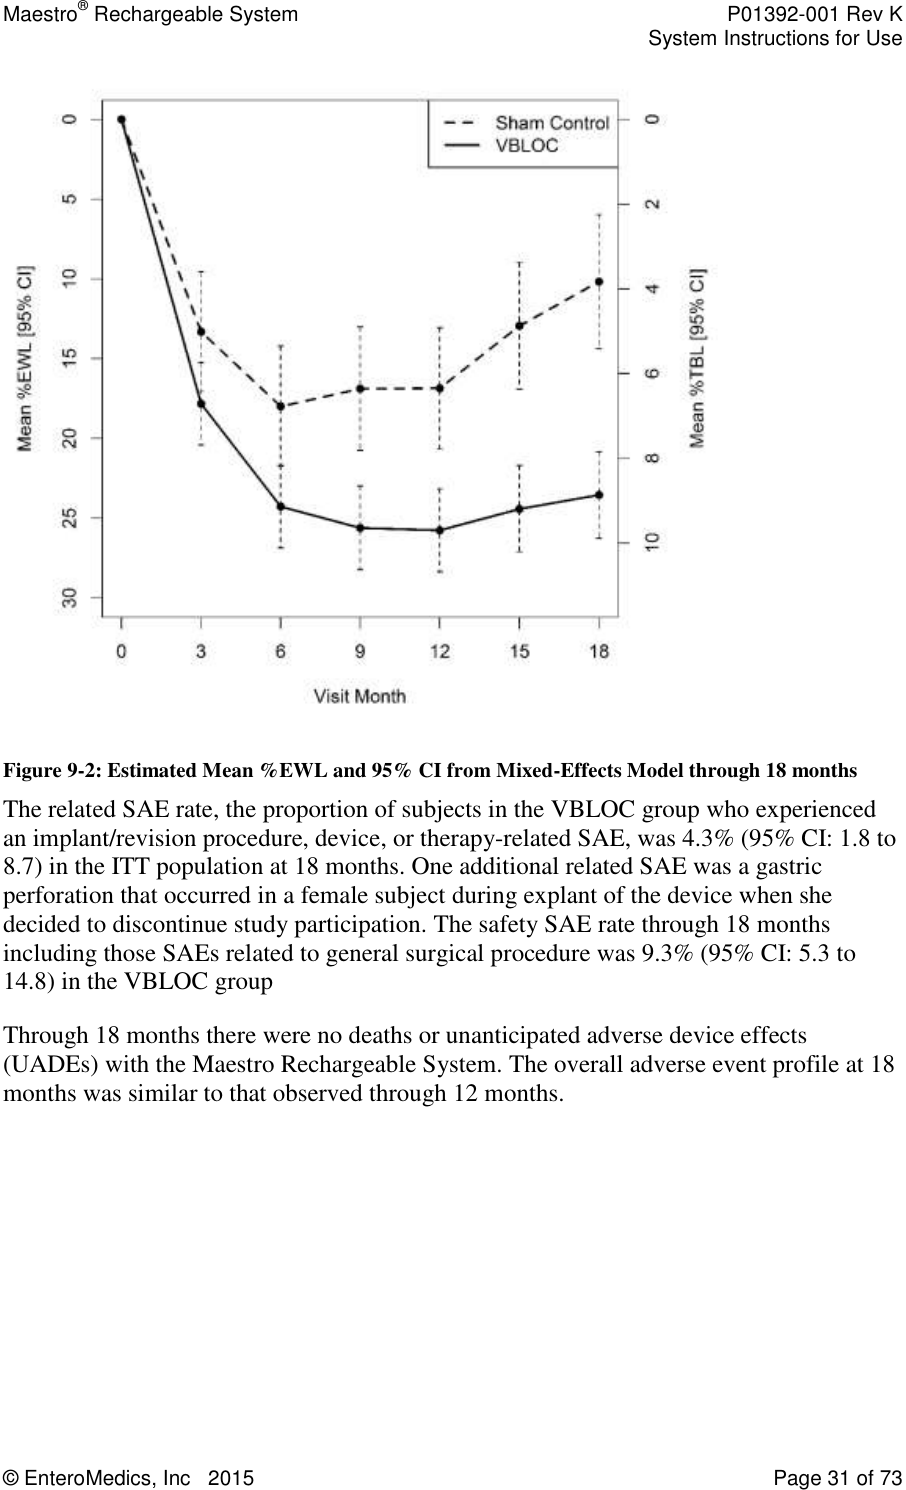 Maestro® Rechargeable System    P01392-001 Rev K     System Instructions for Use  © EnteroMedics, Inc   2015  Page 31 of 73   Figure 9-2: Estimated Mean %EWL and 95% CI from Mixed-Effects Model through 18 months The related SAE rate, the proportion of subjects in the VBLOC group who experienced an implant/revision procedure, device, or therapy-related SAE, was 4.3% (95% CI: 1.8 to 8.7) in the ITT population at 18 months. One additional related SAE was a gastric perforation that occurred in a female subject during explant of the device when she decided to discontinue study participation. The safety SAE rate through 18 months including those SAEs related to general surgical procedure was 9.3% (95% CI: 5.3 to 14.8) in the VBLOC group Through 18 months there were no deaths or unanticipated adverse device effects (UADEs) with the Maestro Rechargeable System. The overall adverse event profile at 18 months was similar to that observed through 12 months.    